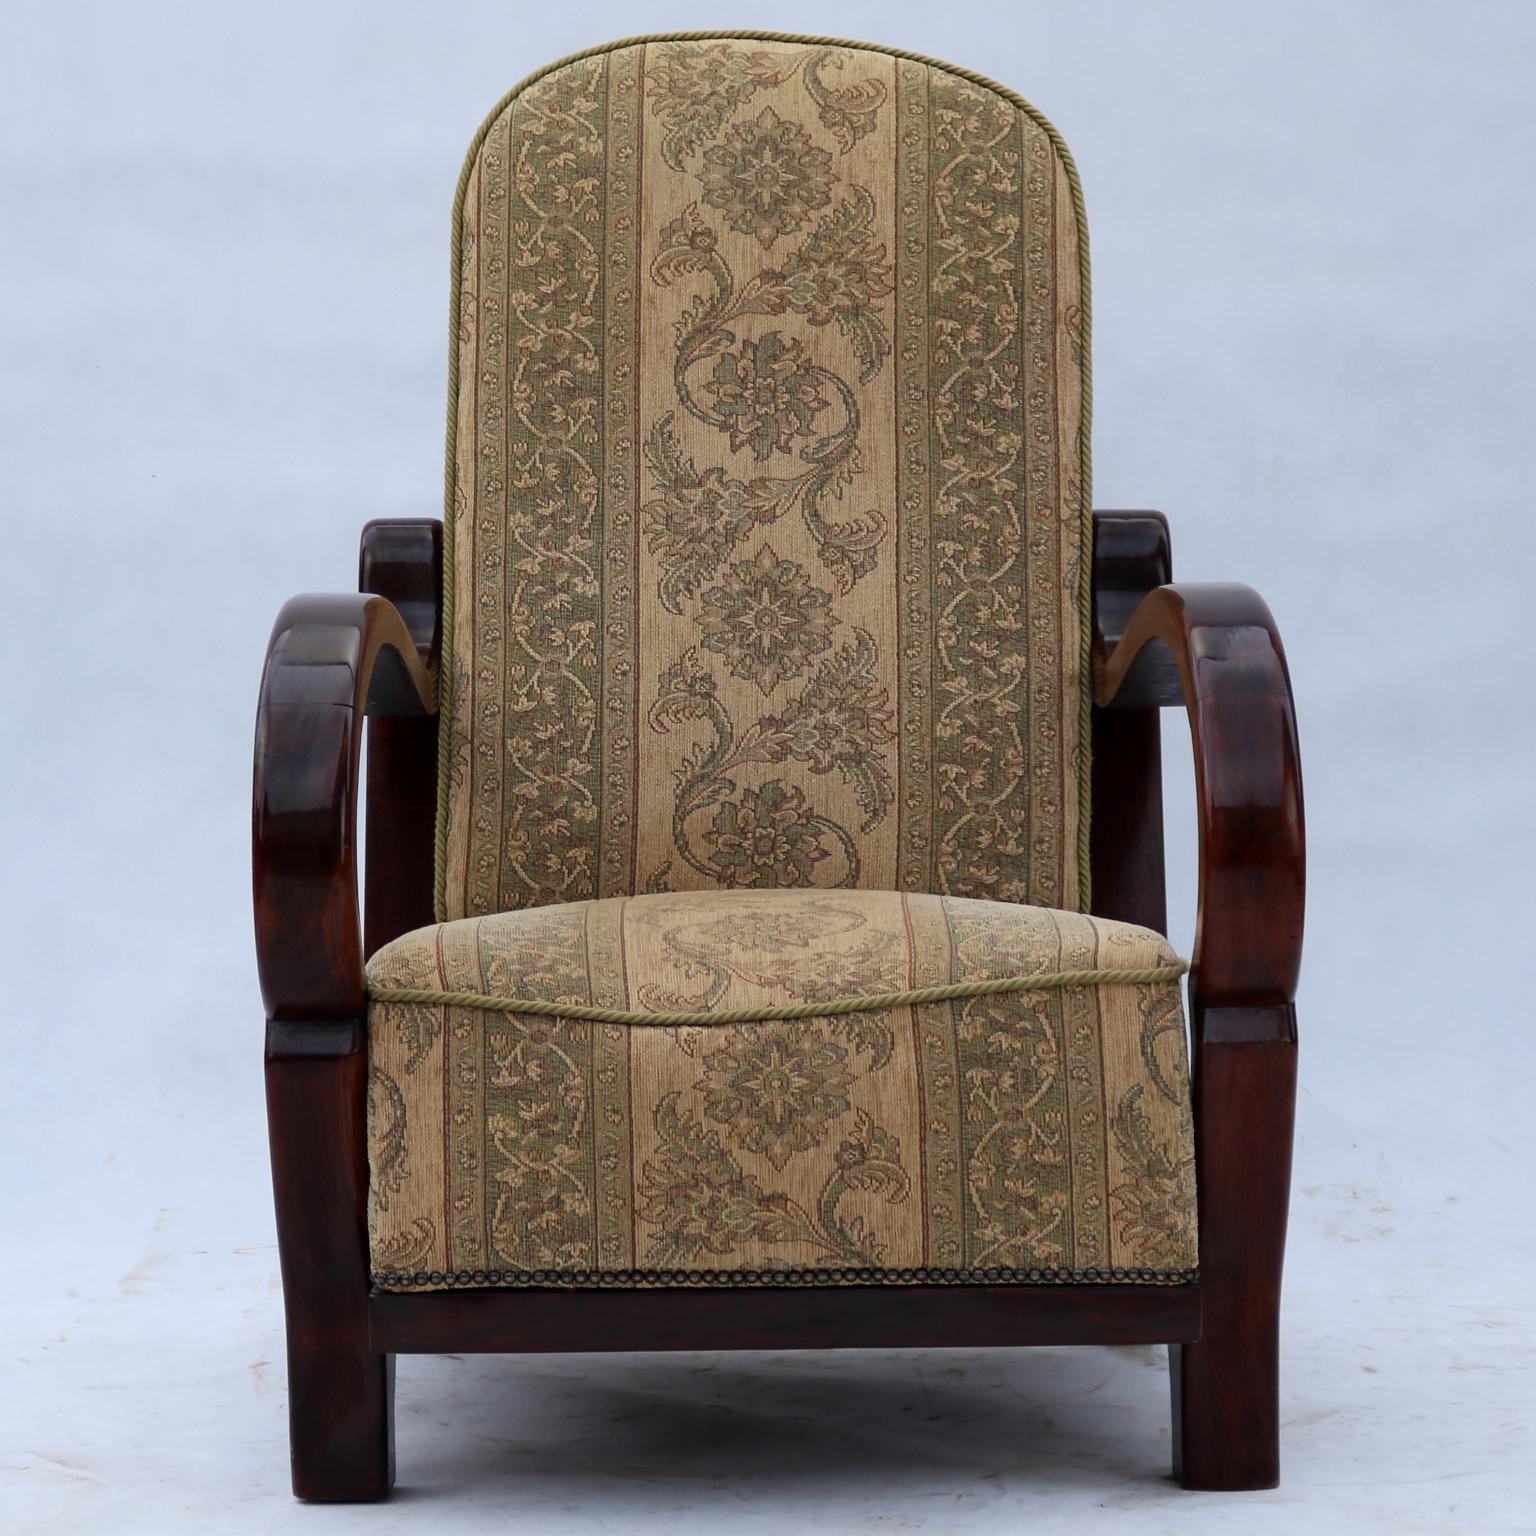 Art Deco armchair in original upholstery, stabile construction, beech wood, removable seat cushion.